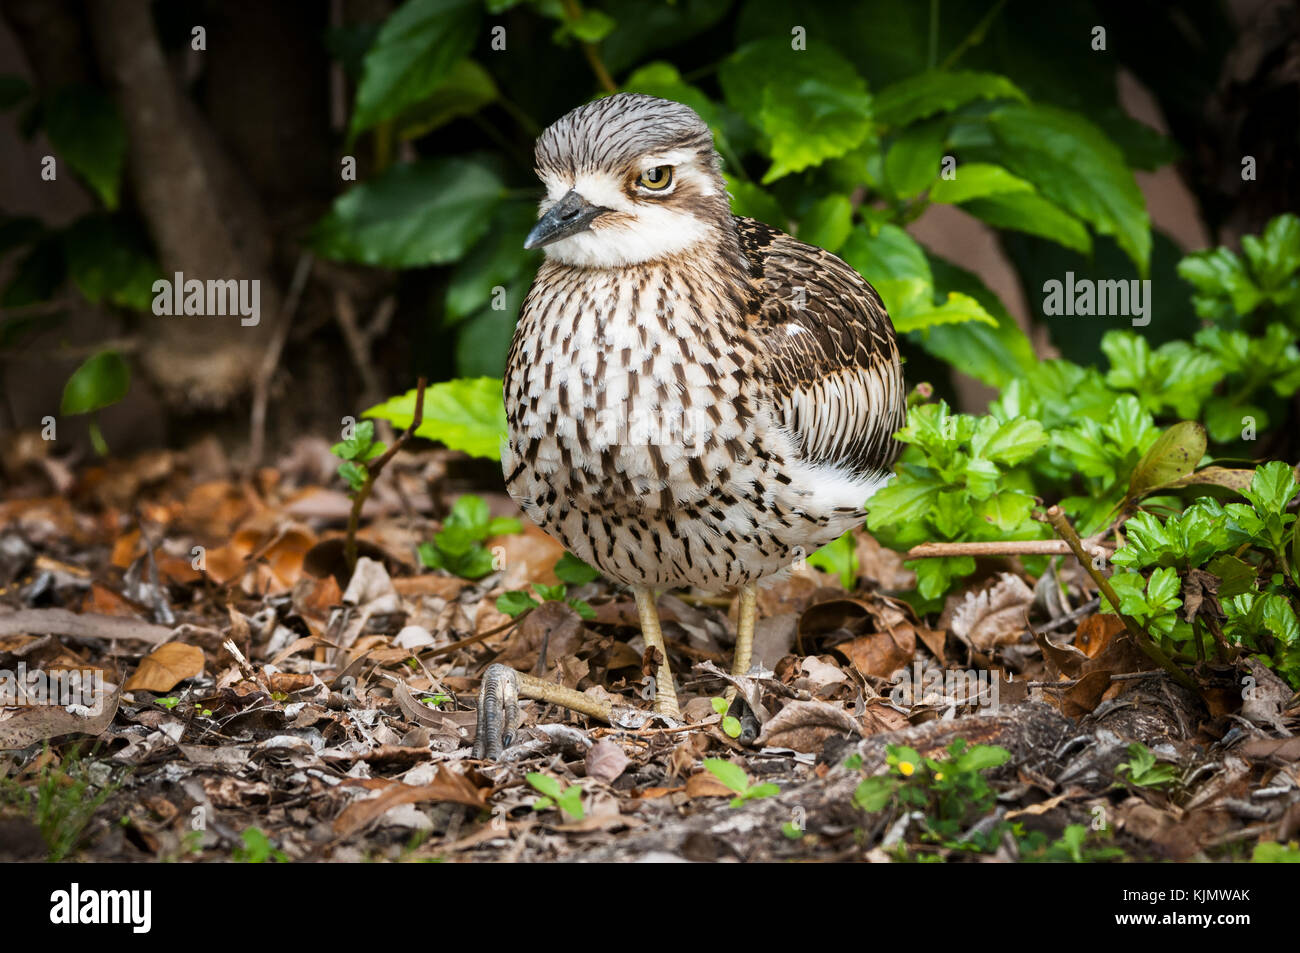 Bush Stone Curlew resting well camouflaged in the dry leafs. Stock Photo